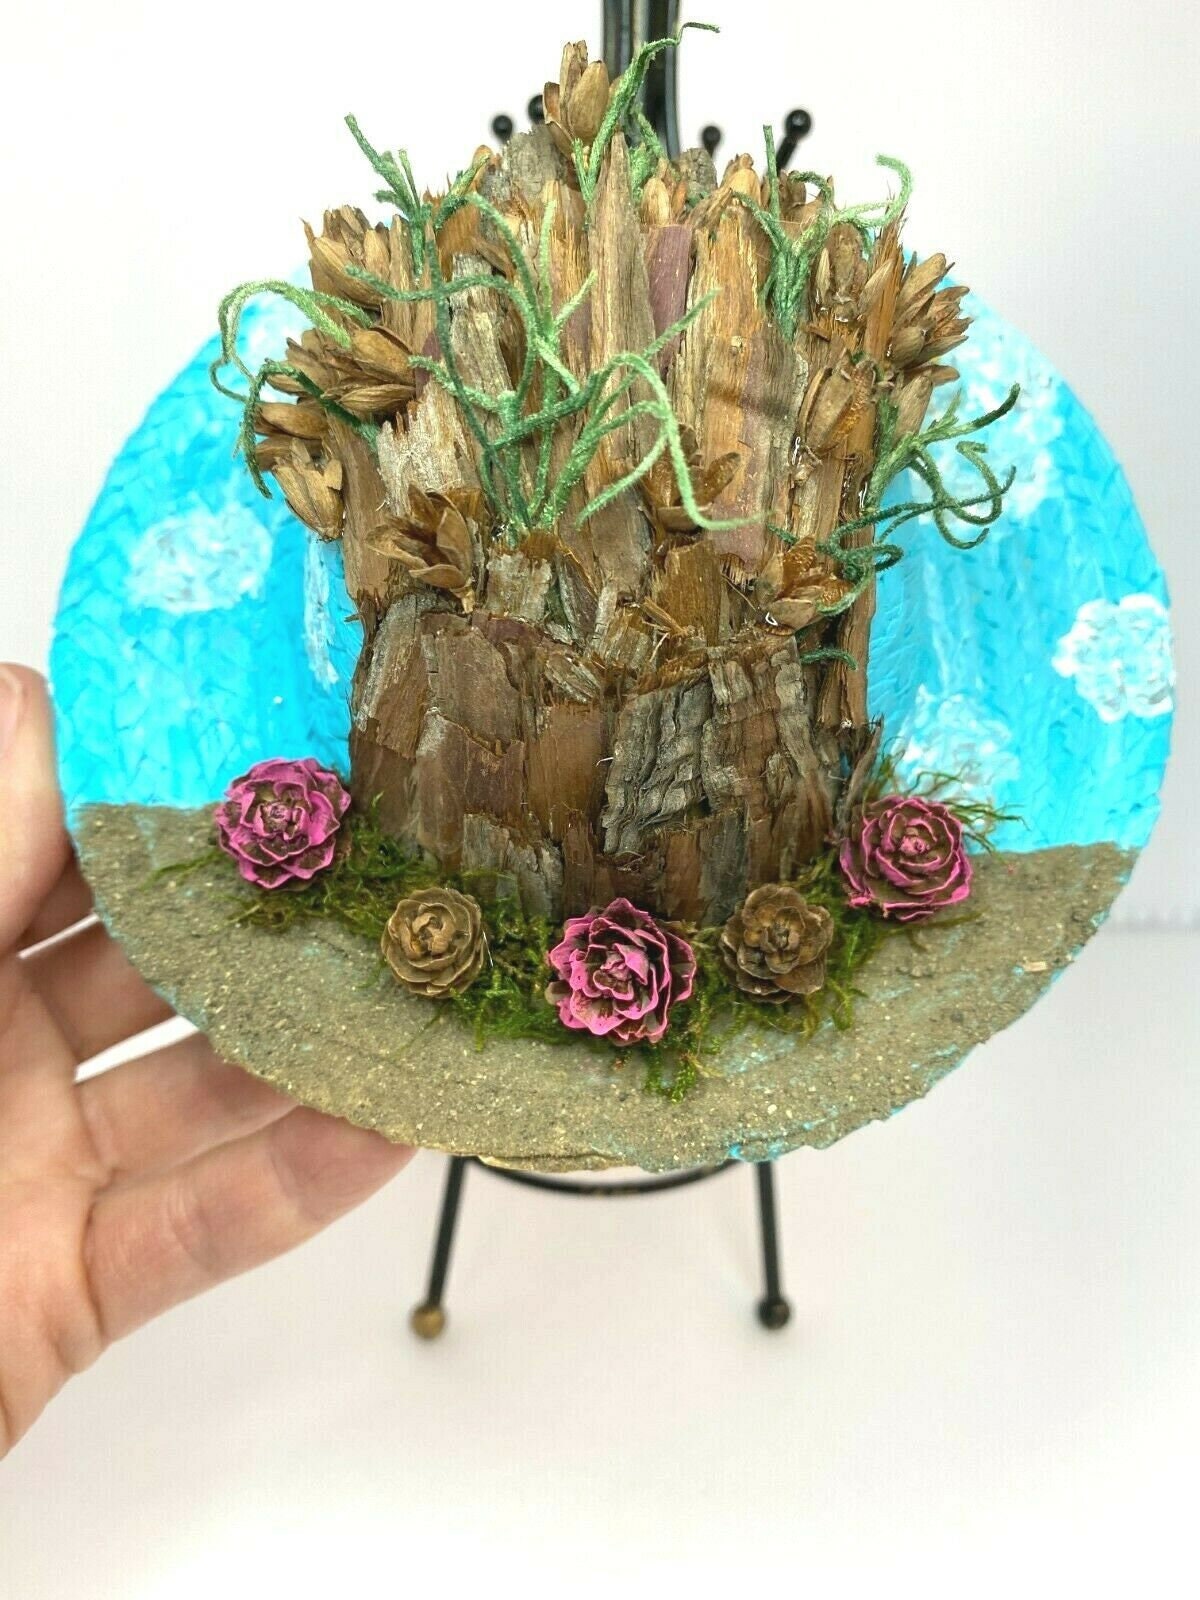 Handmade Painted Straw / Whicker Hat Wall Hanging, Natural Art, Nature Wall Hanging Country Style.